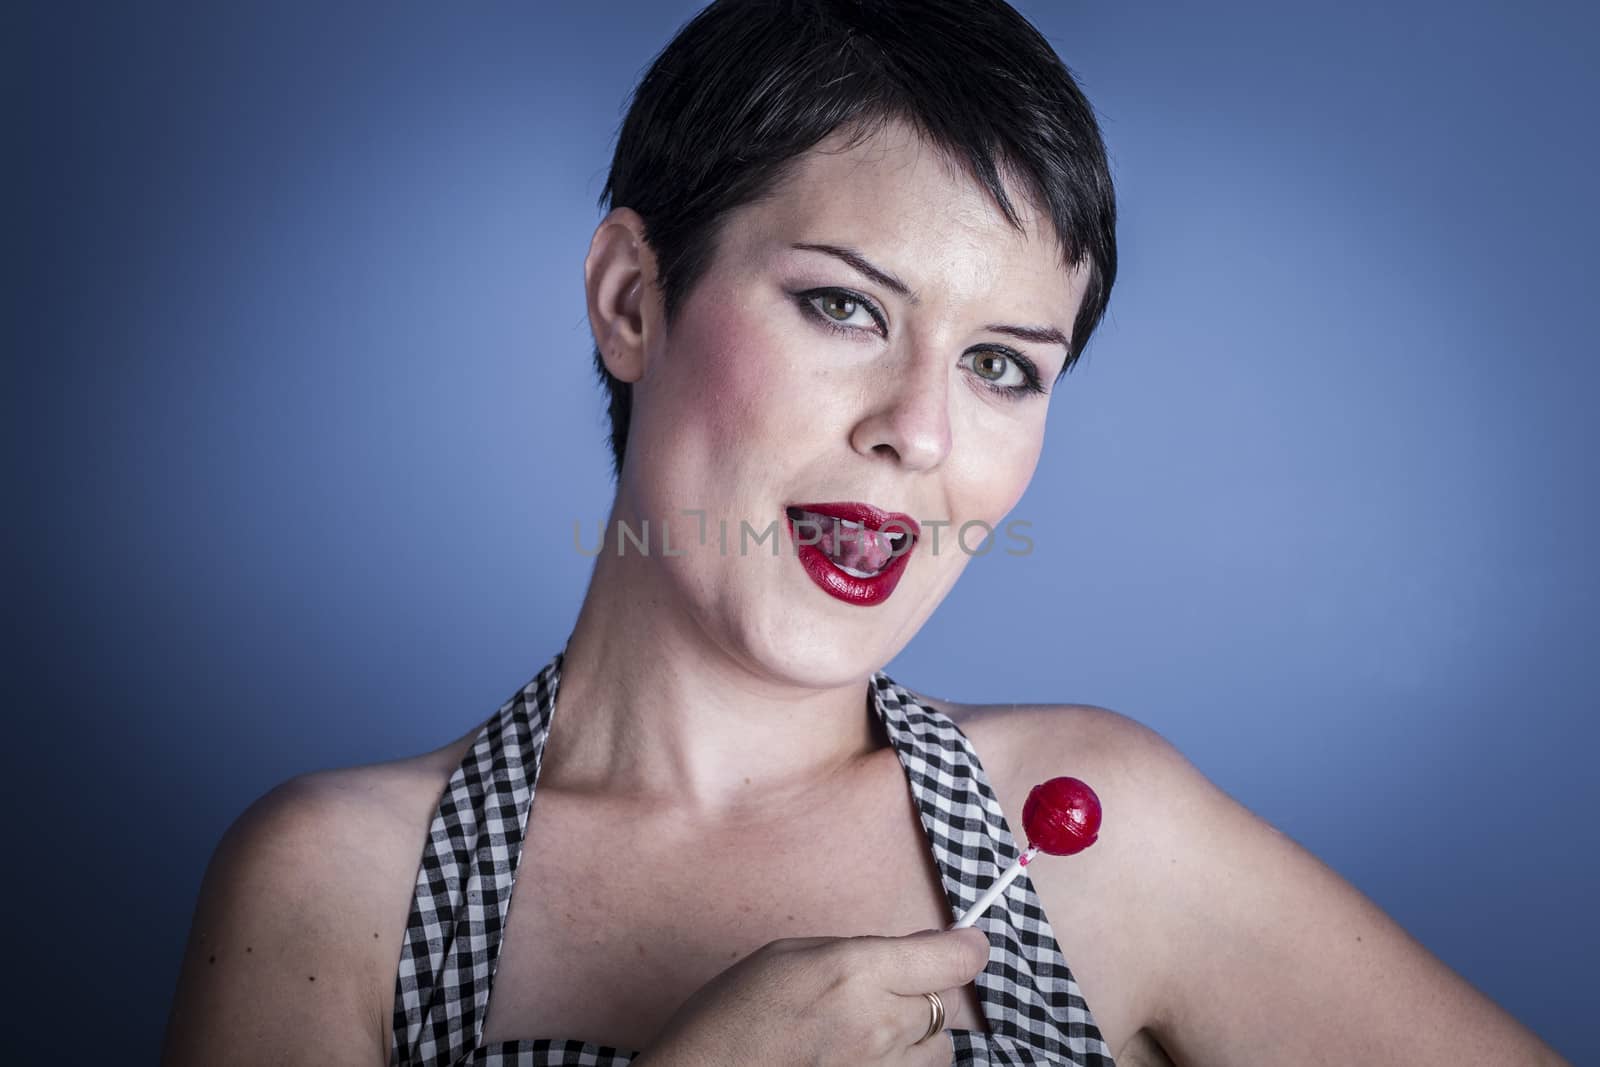 happy young woman with lollypop in her mouth on blue background